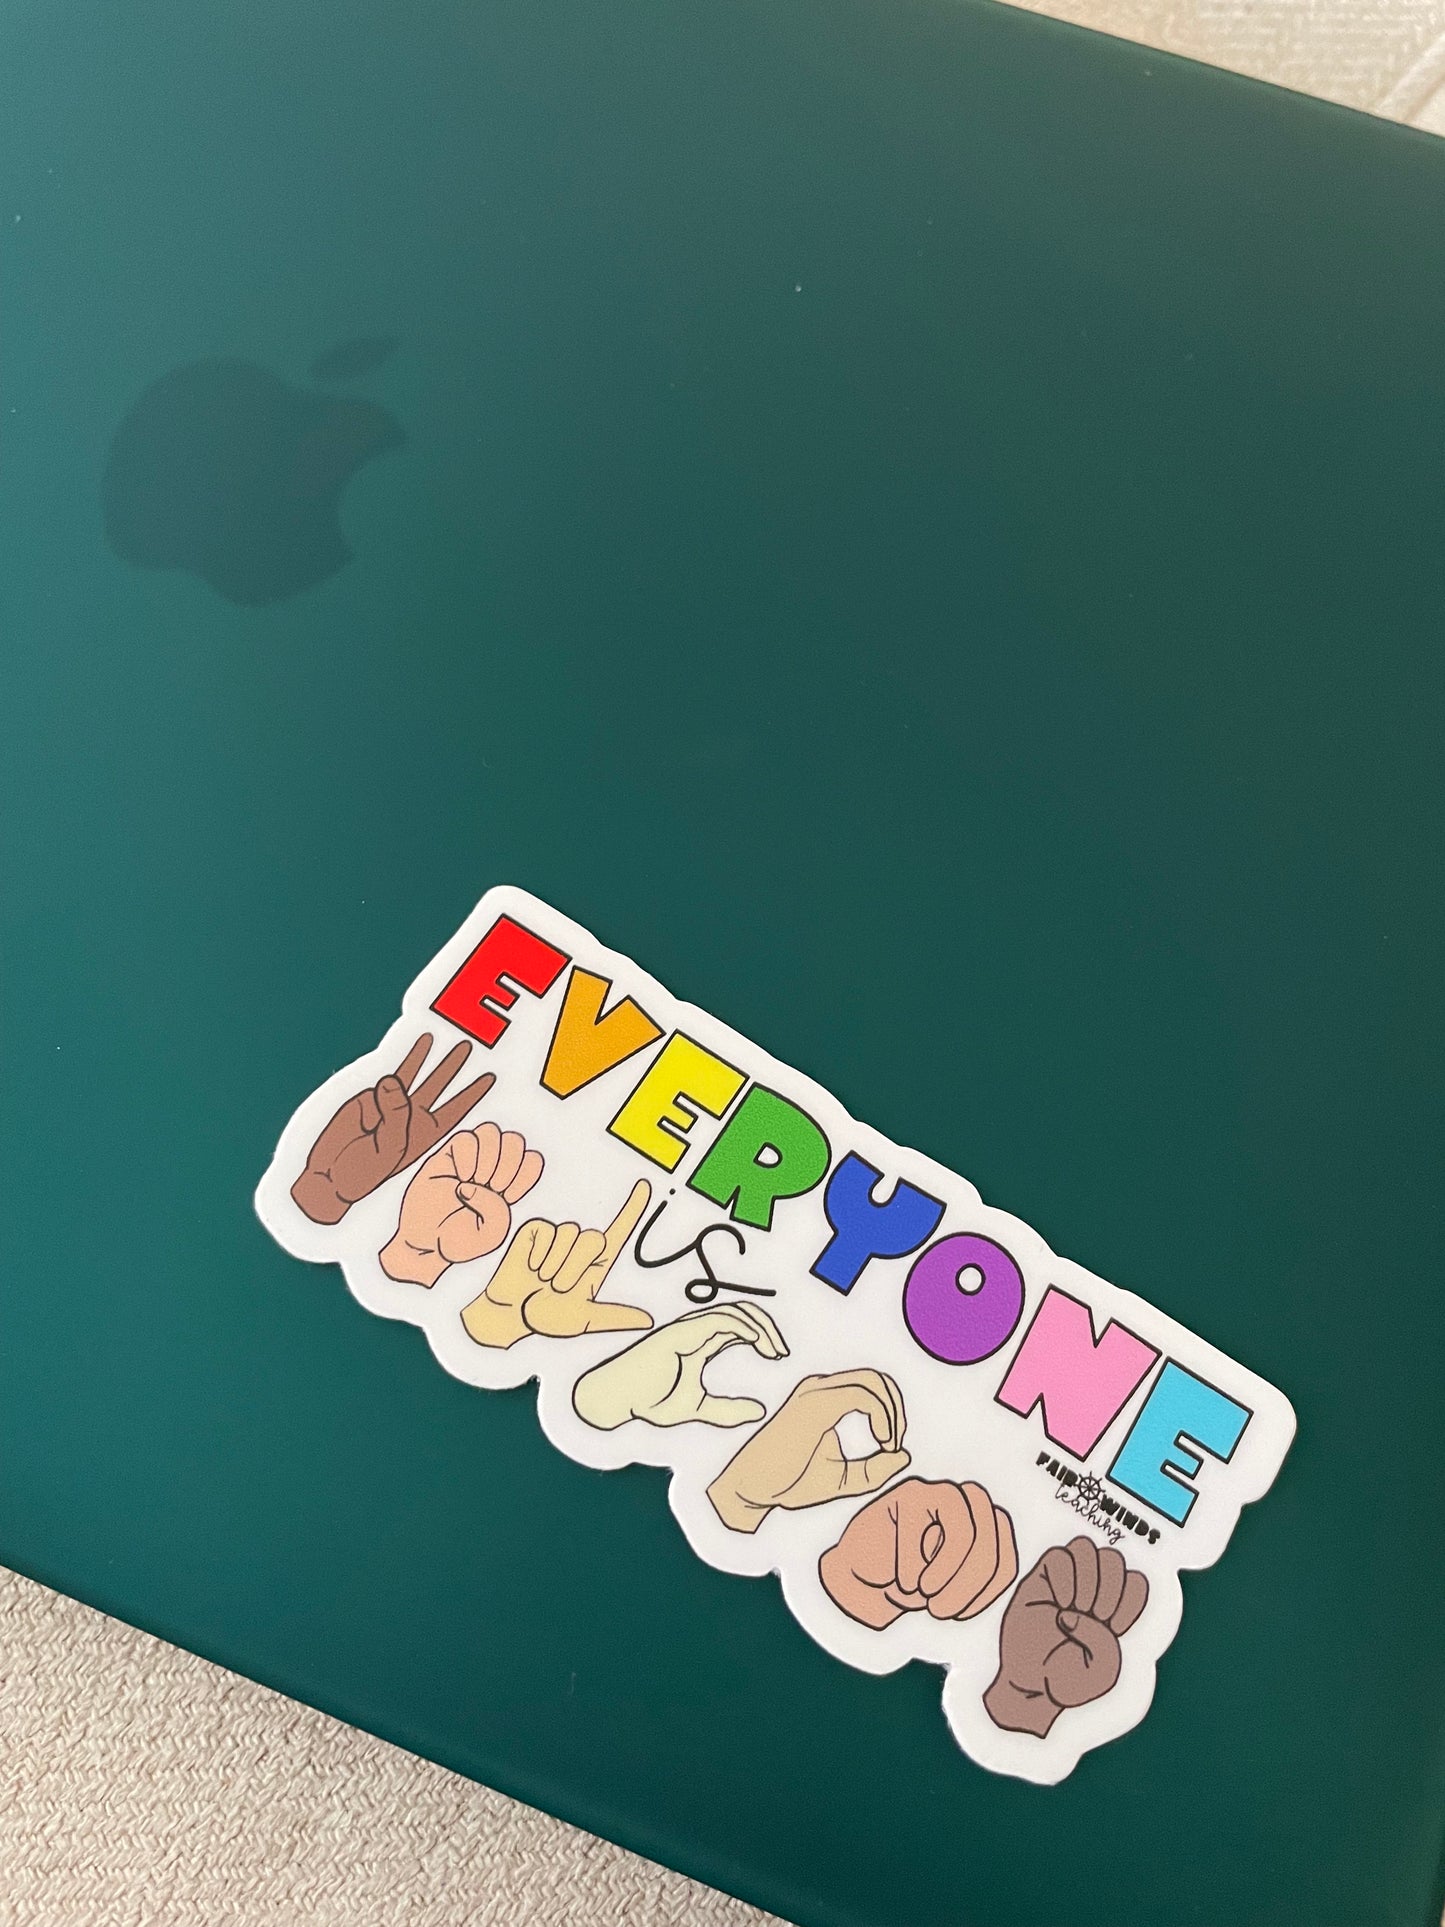 Everyone is Welcome Sticker